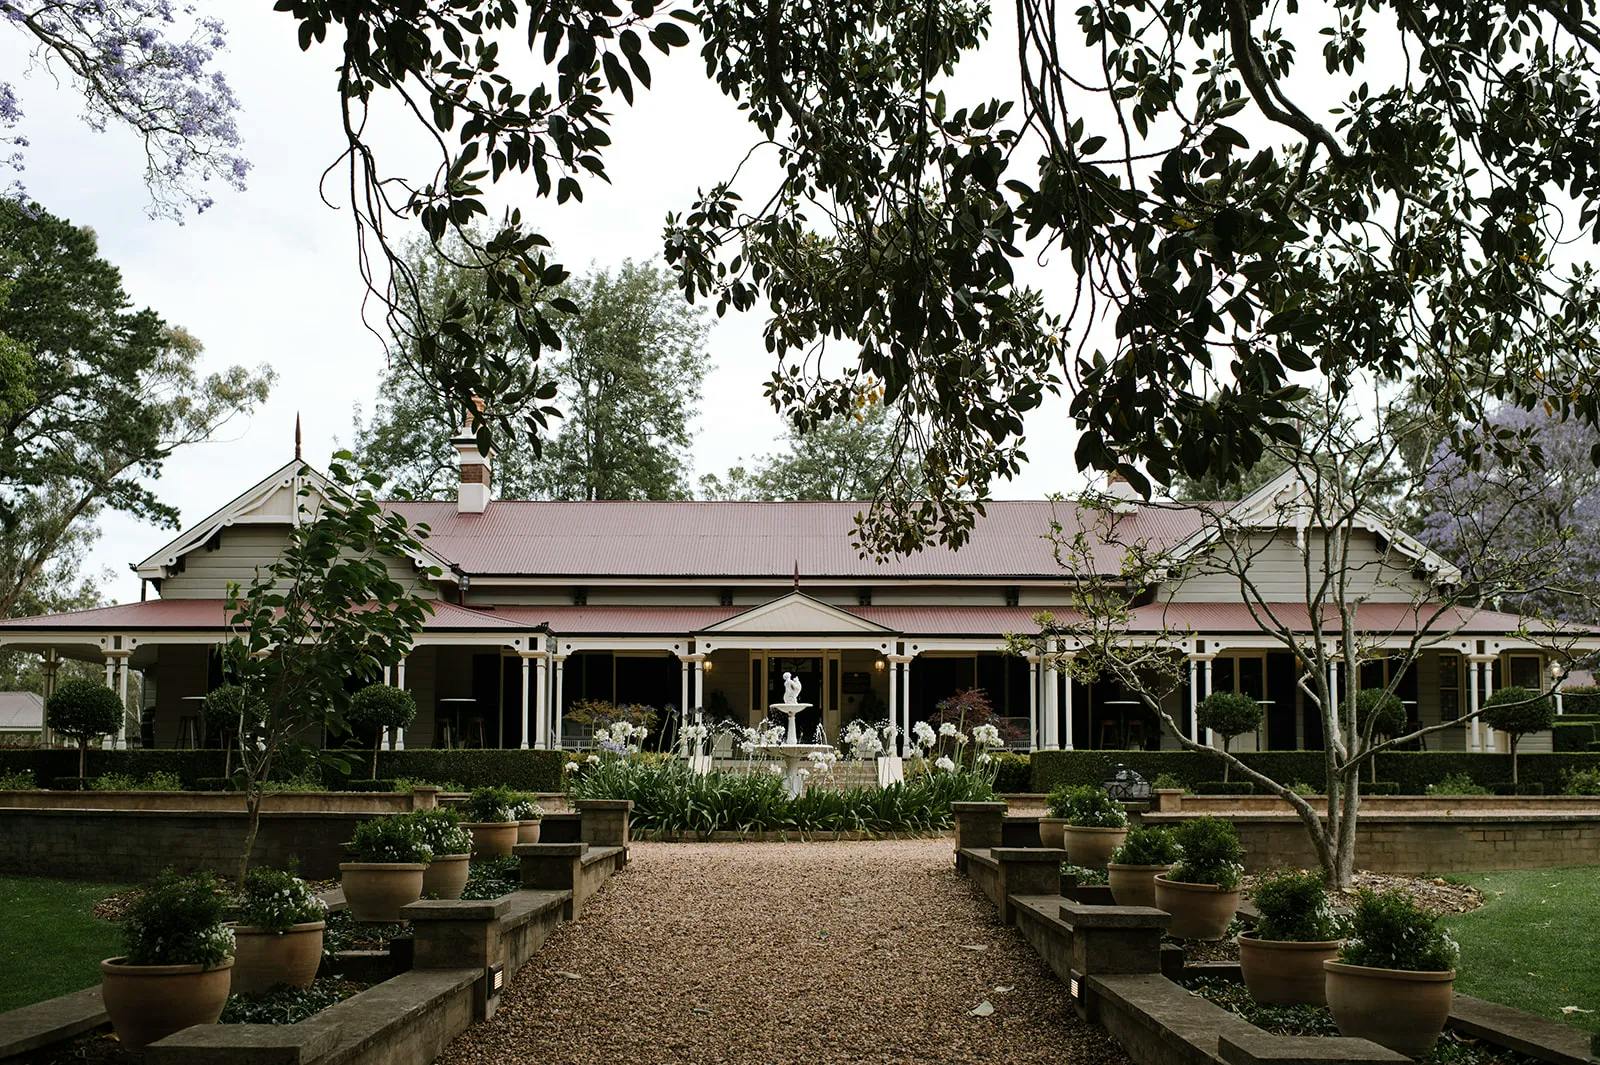 A charming, one-story farmhouse with a red roof and a wide porch, framed by hanging branches and potted plants along a gravel path. The garden features a white fountain surrounded by green foliage and flowers, enhancing the serene countryside setting.